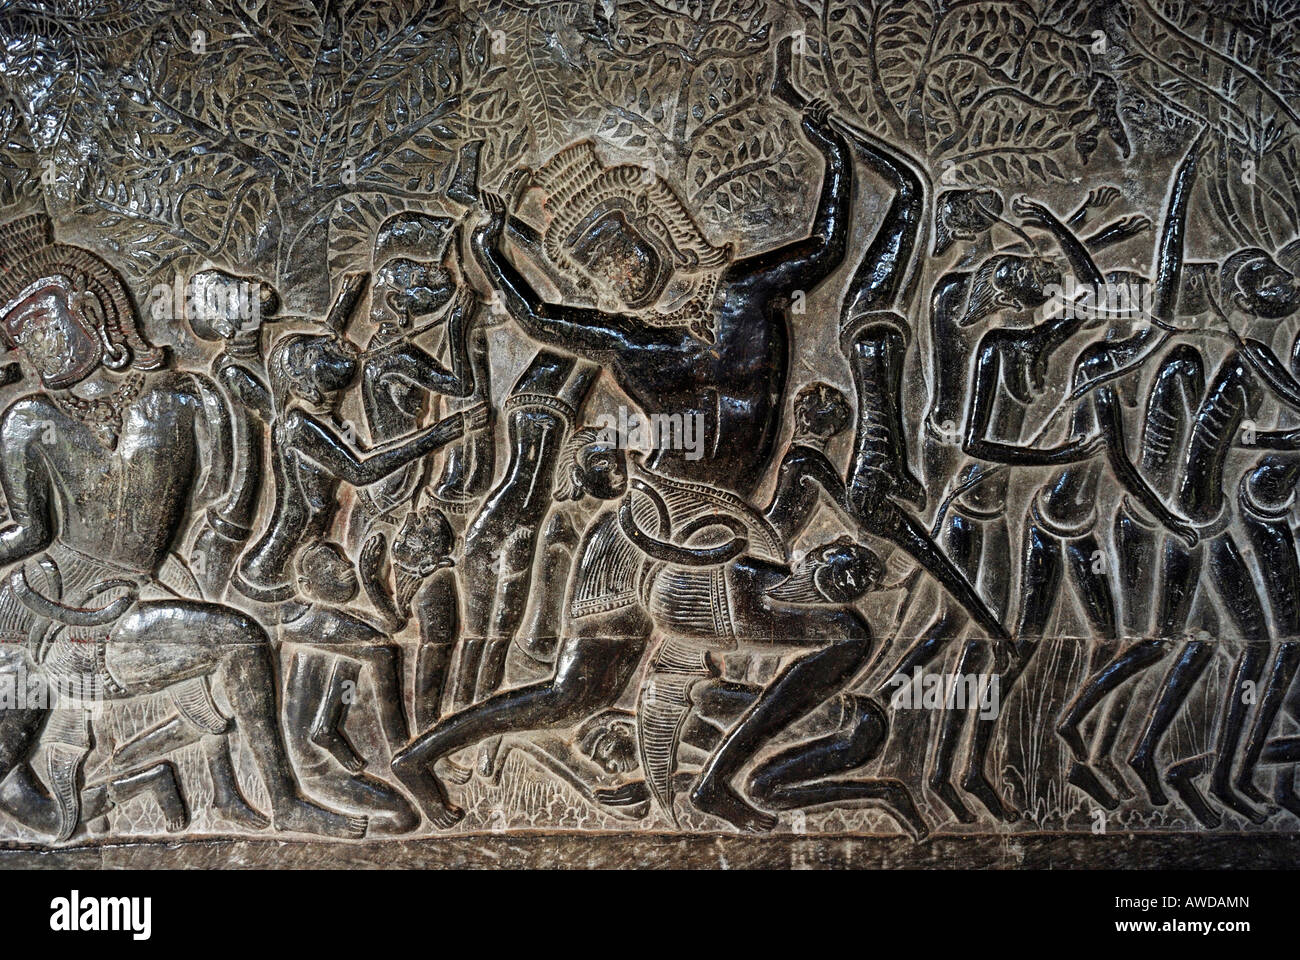 Bas-relief showing a scene in the hell as hinduistic mythology tells, Angkor Wat temple, Cambodia Stock Photo